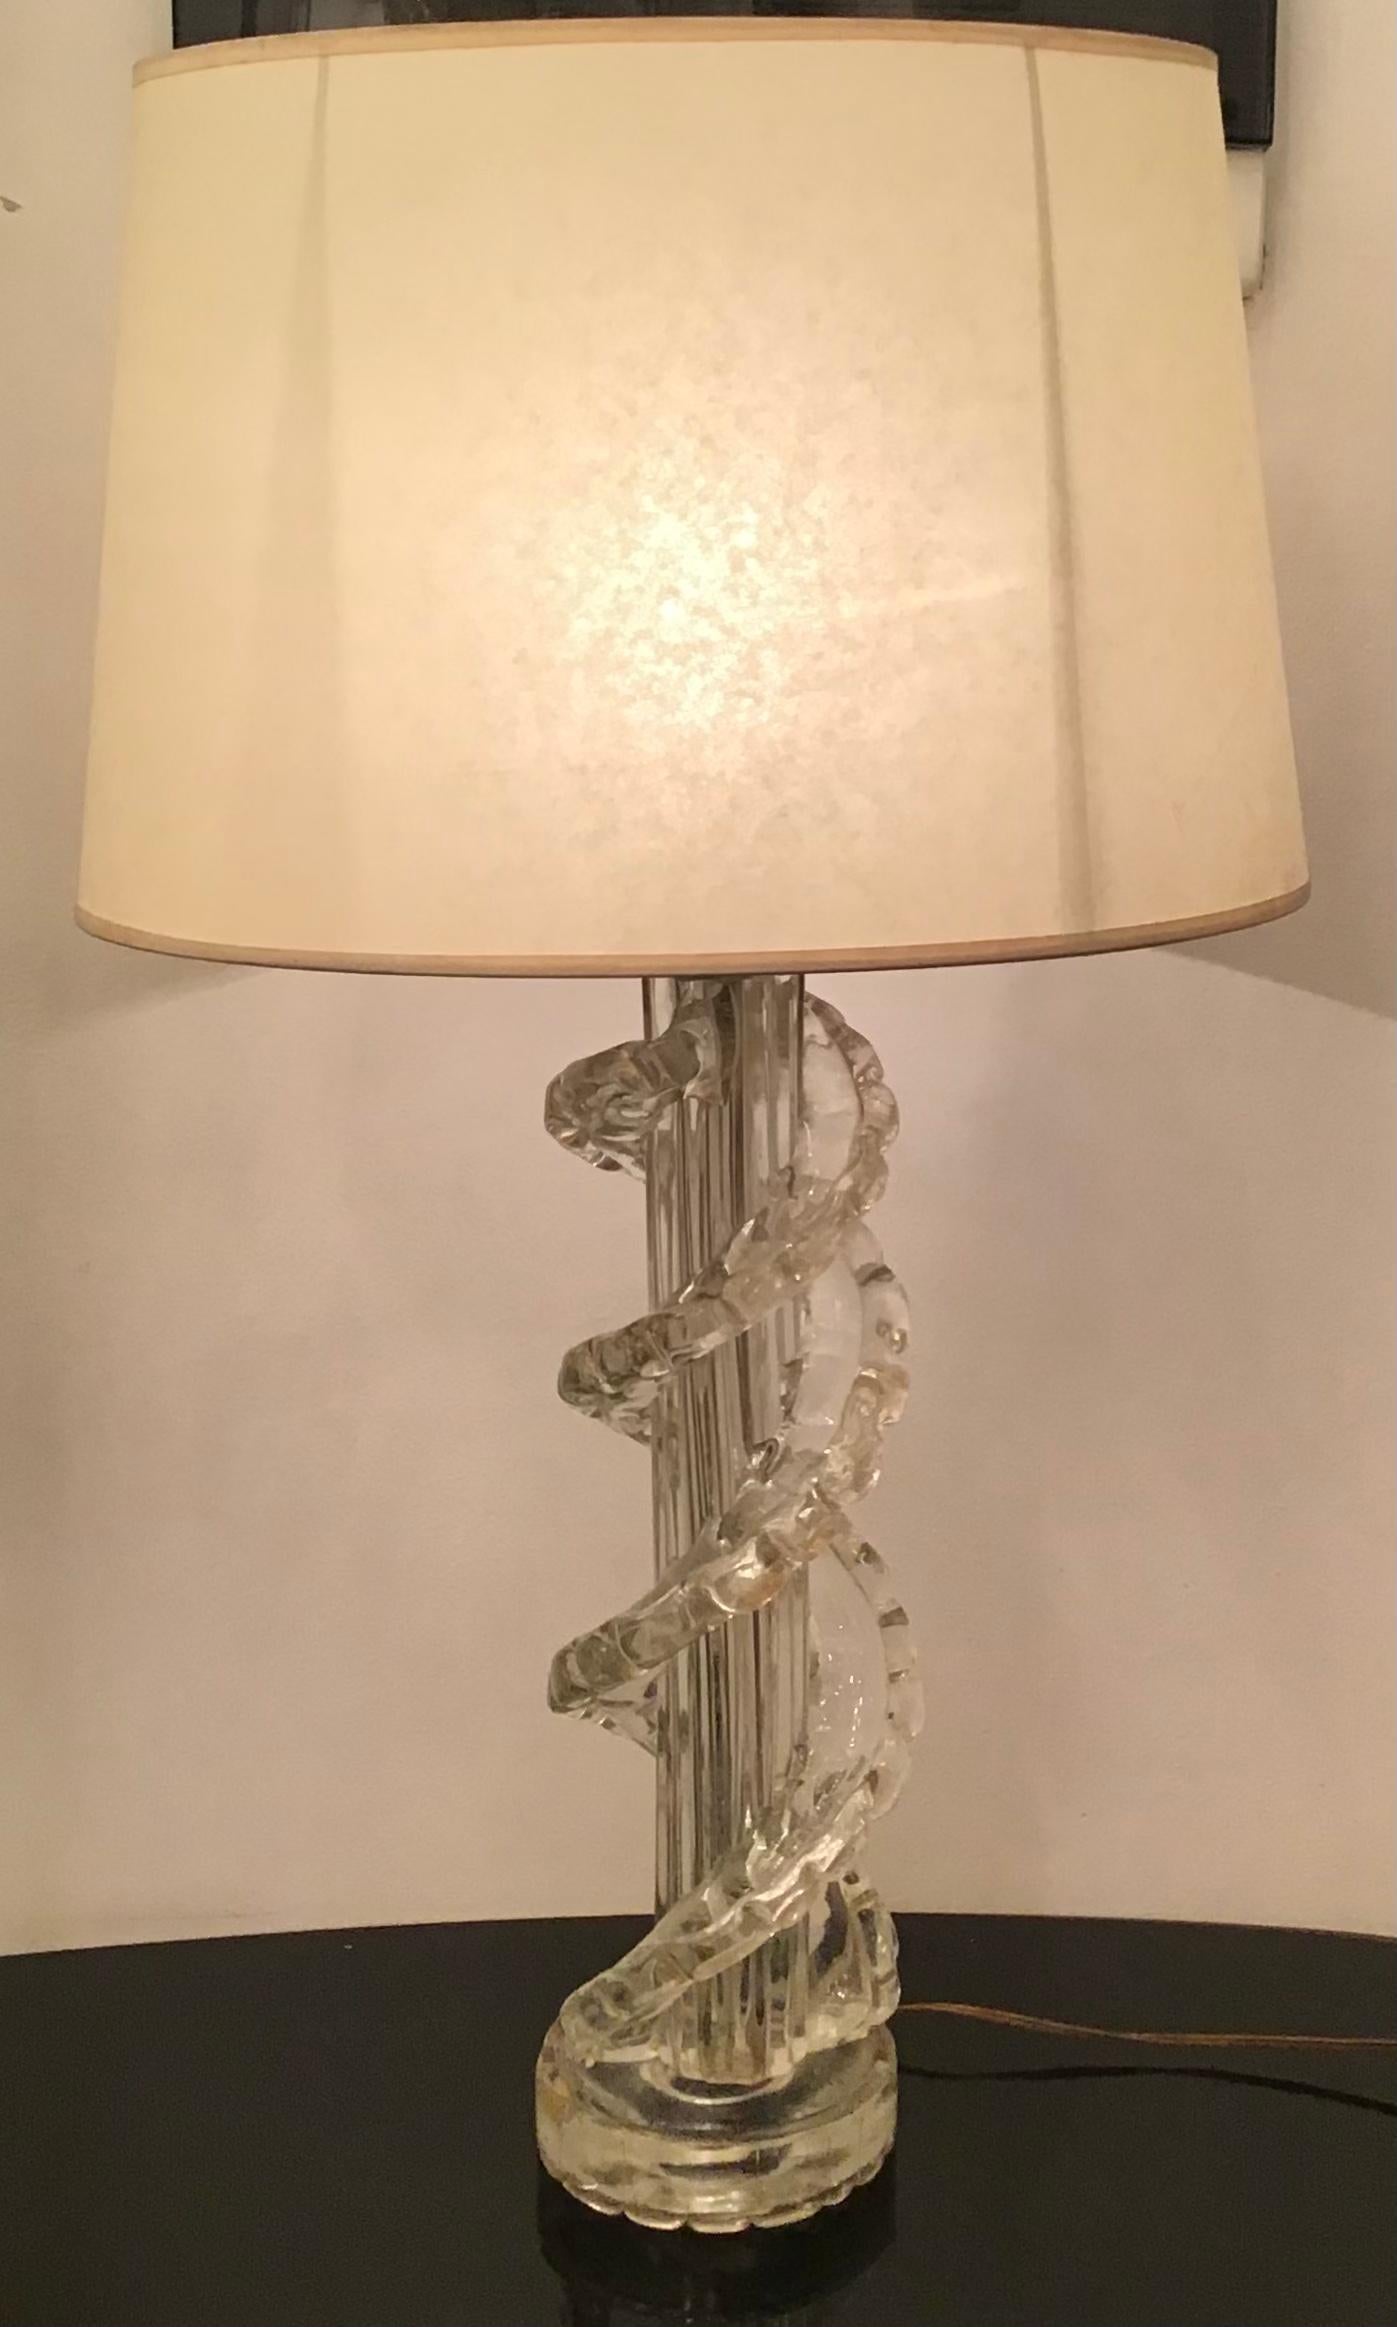 Ercole Barovier Table Lamp Murano Glass Brass Parchment Lampshade 1940 Italy For Sale 2